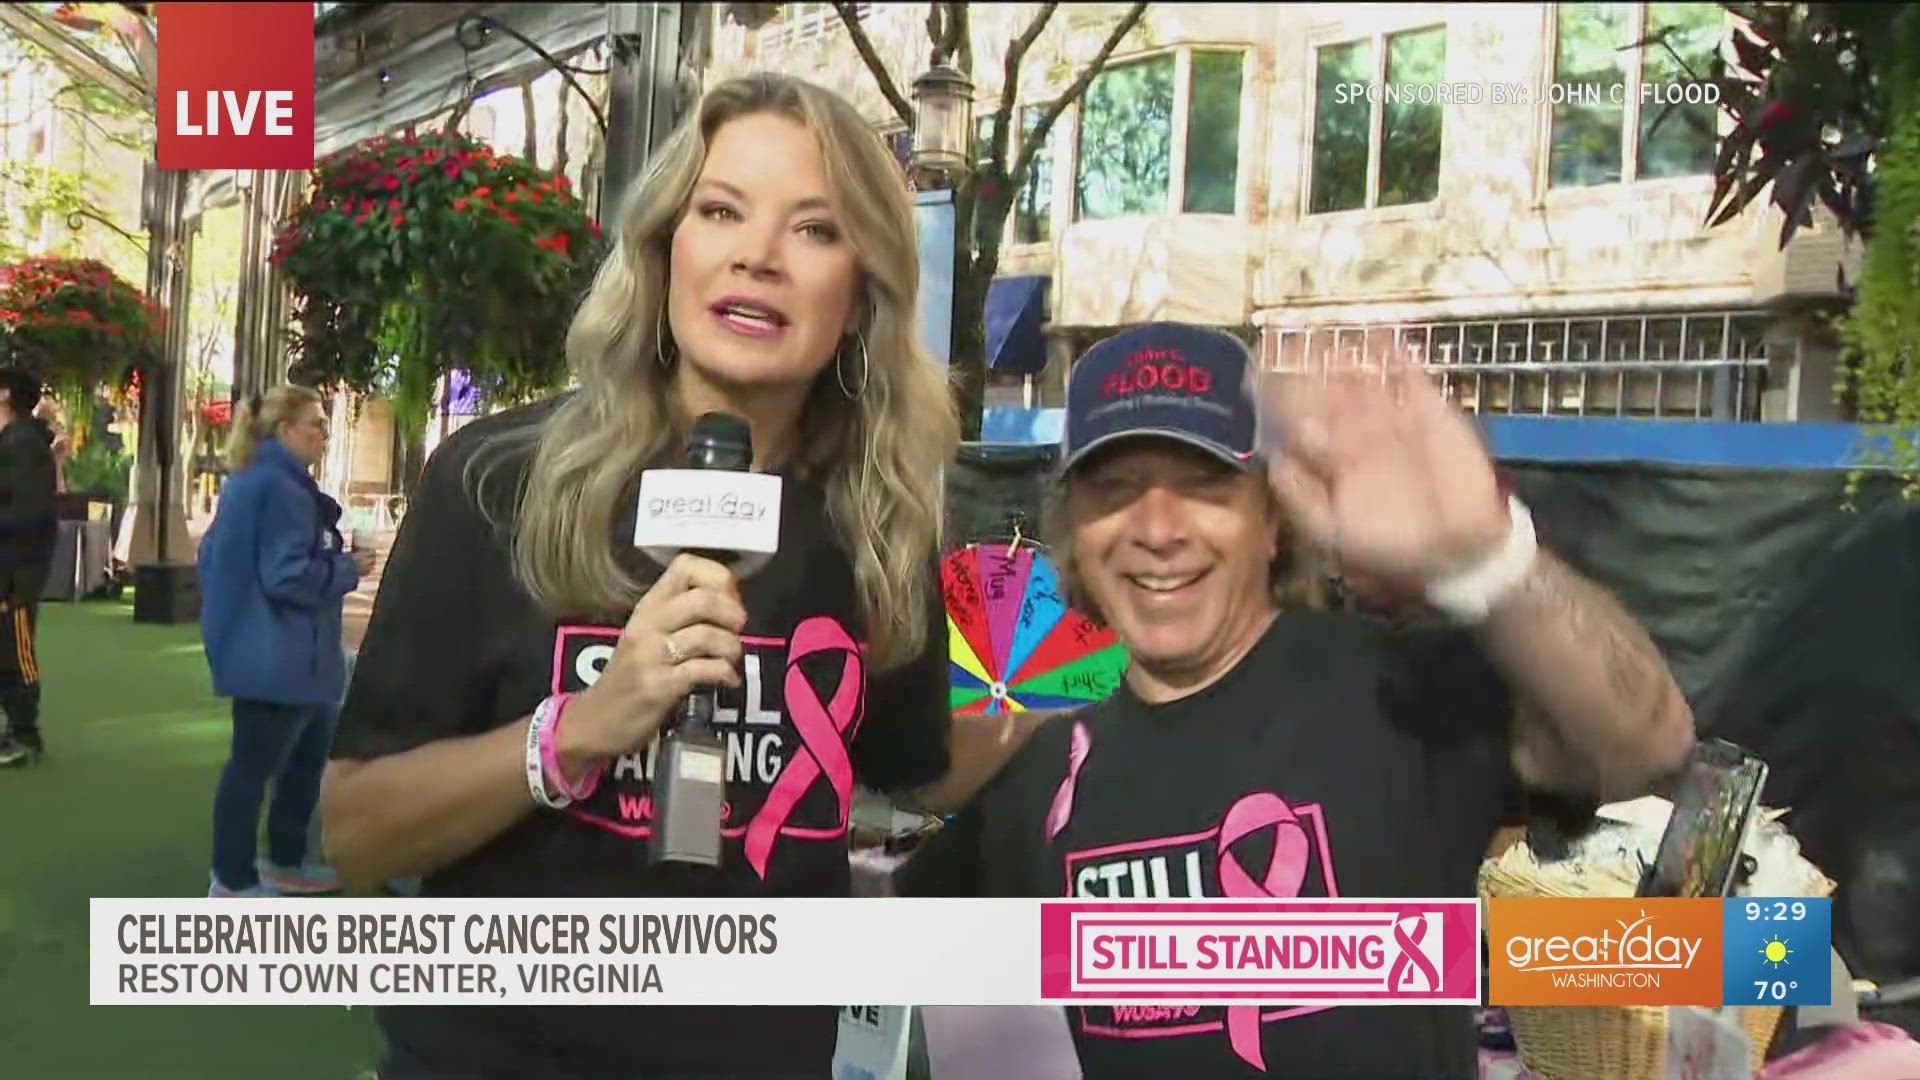 Sponsored by John C. Flood. See how the experts at John C. Flood are joining the Still Standing event at Reston Town Center and celebrating breast cancer survivors.